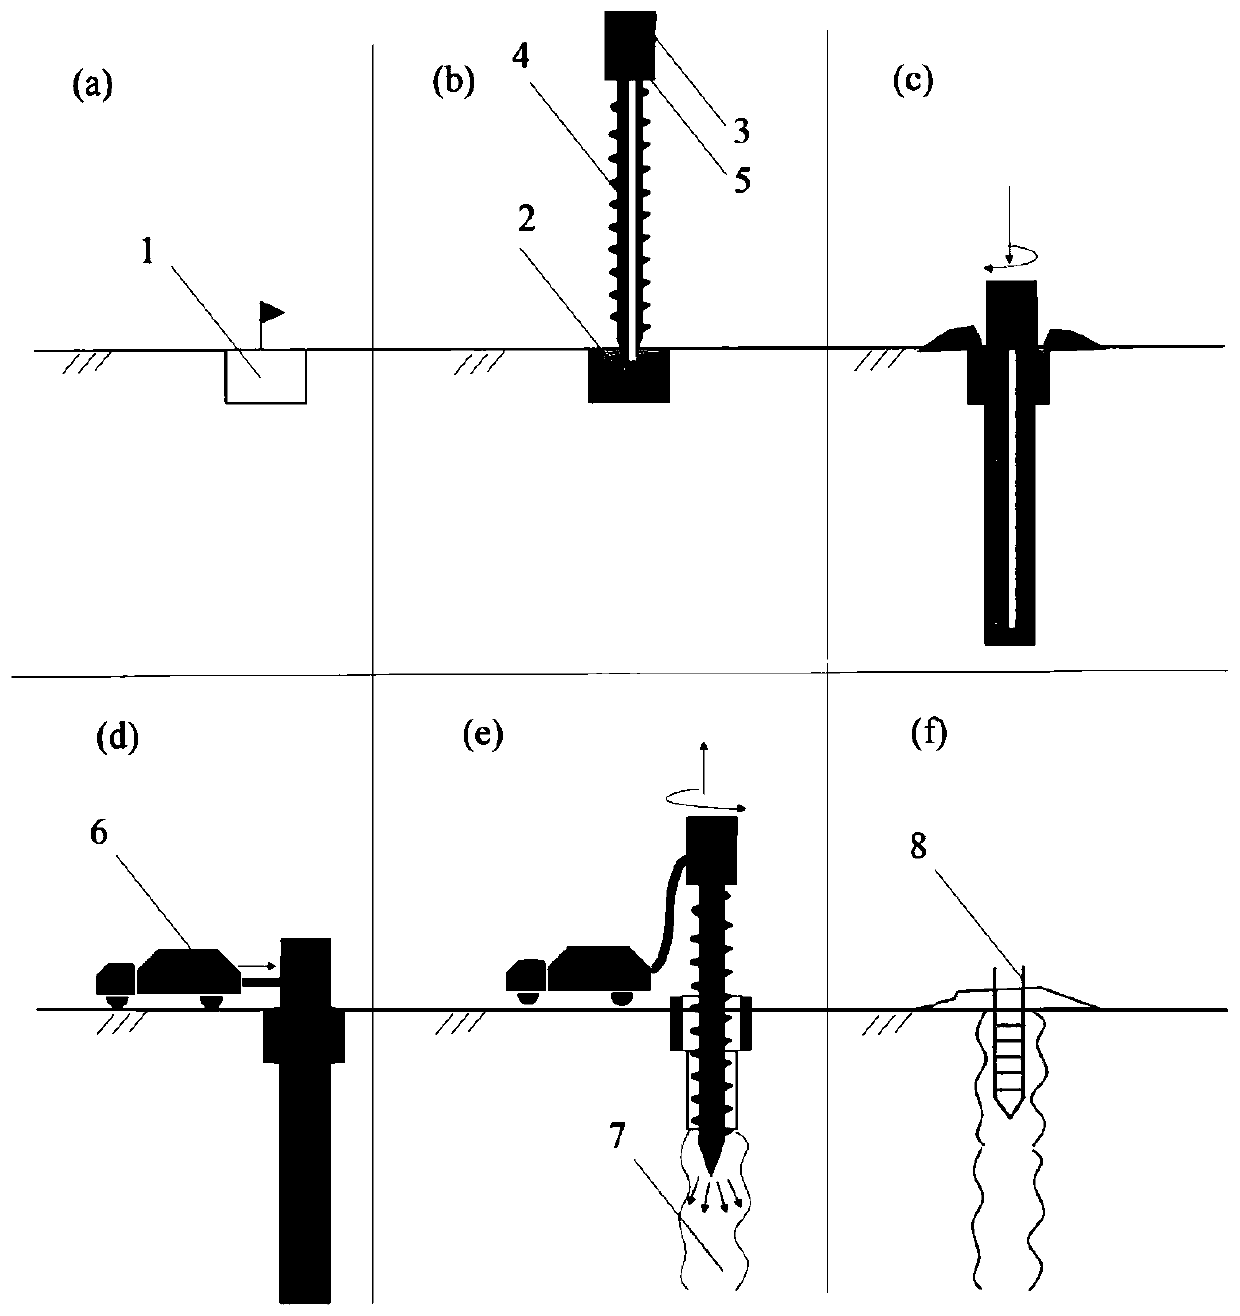 Construction method of pressurized cast-in-place pile based on reinforced fibers and metakaolin